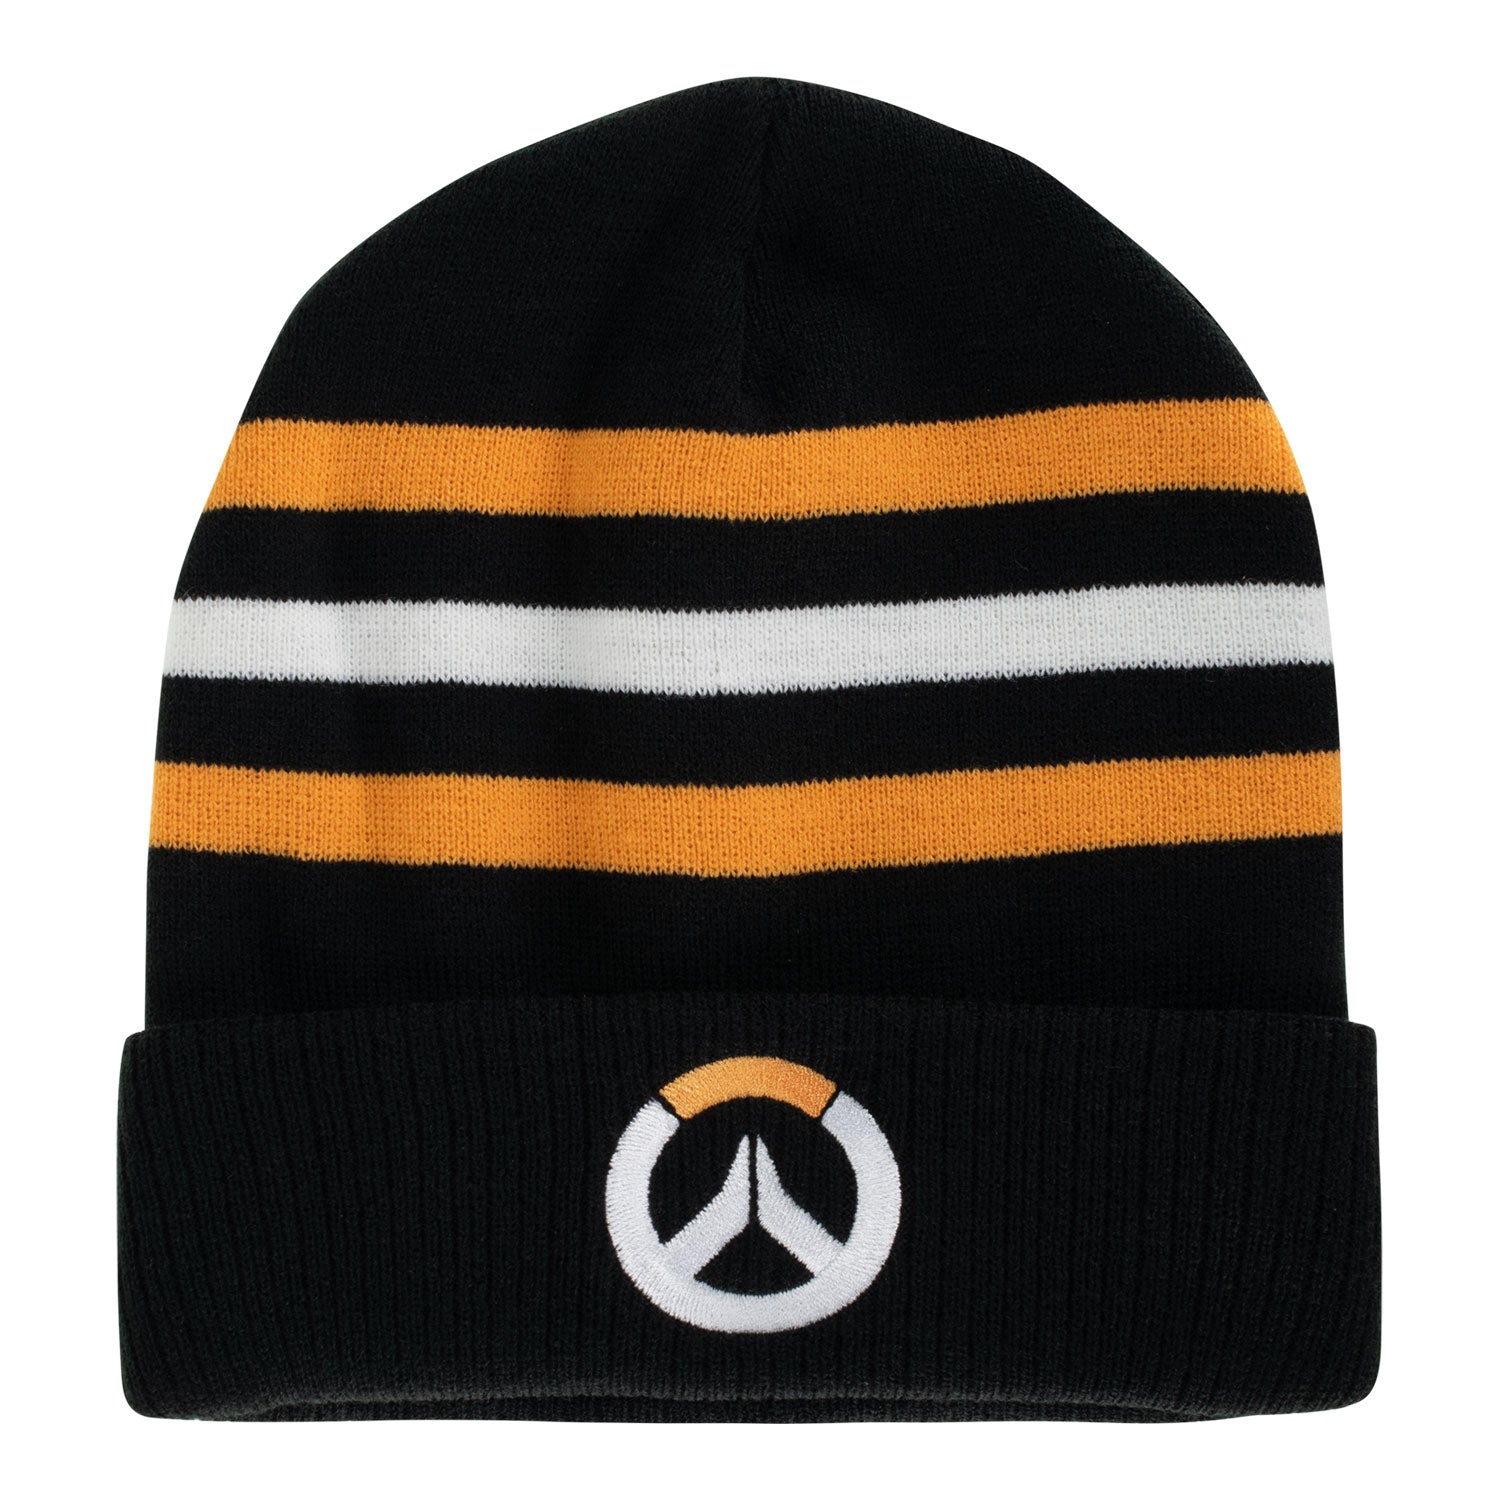 Overwatch Gift Set Beanie & Scarf - Front View of Beanie